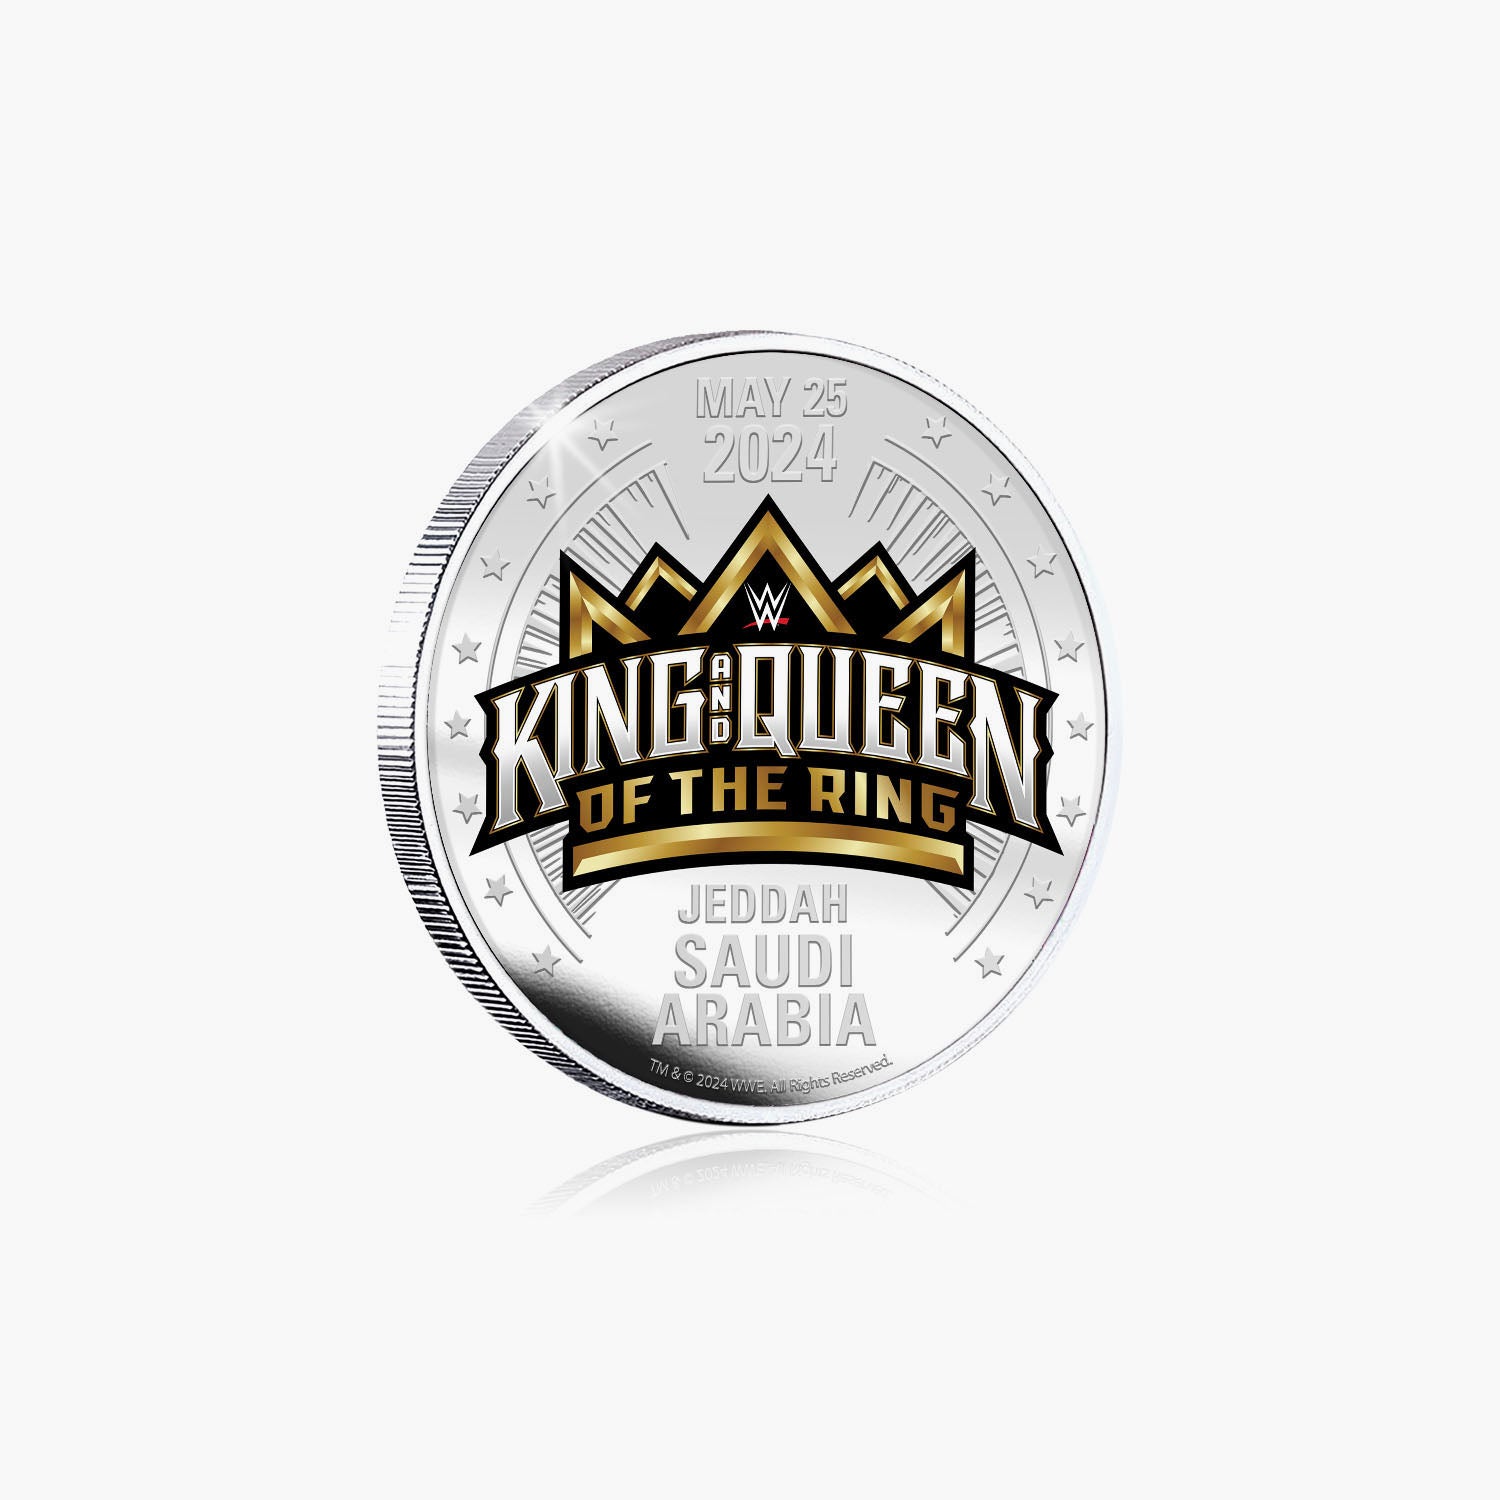 WWE King and Queen of the Ring Premium Live Event Commemorative